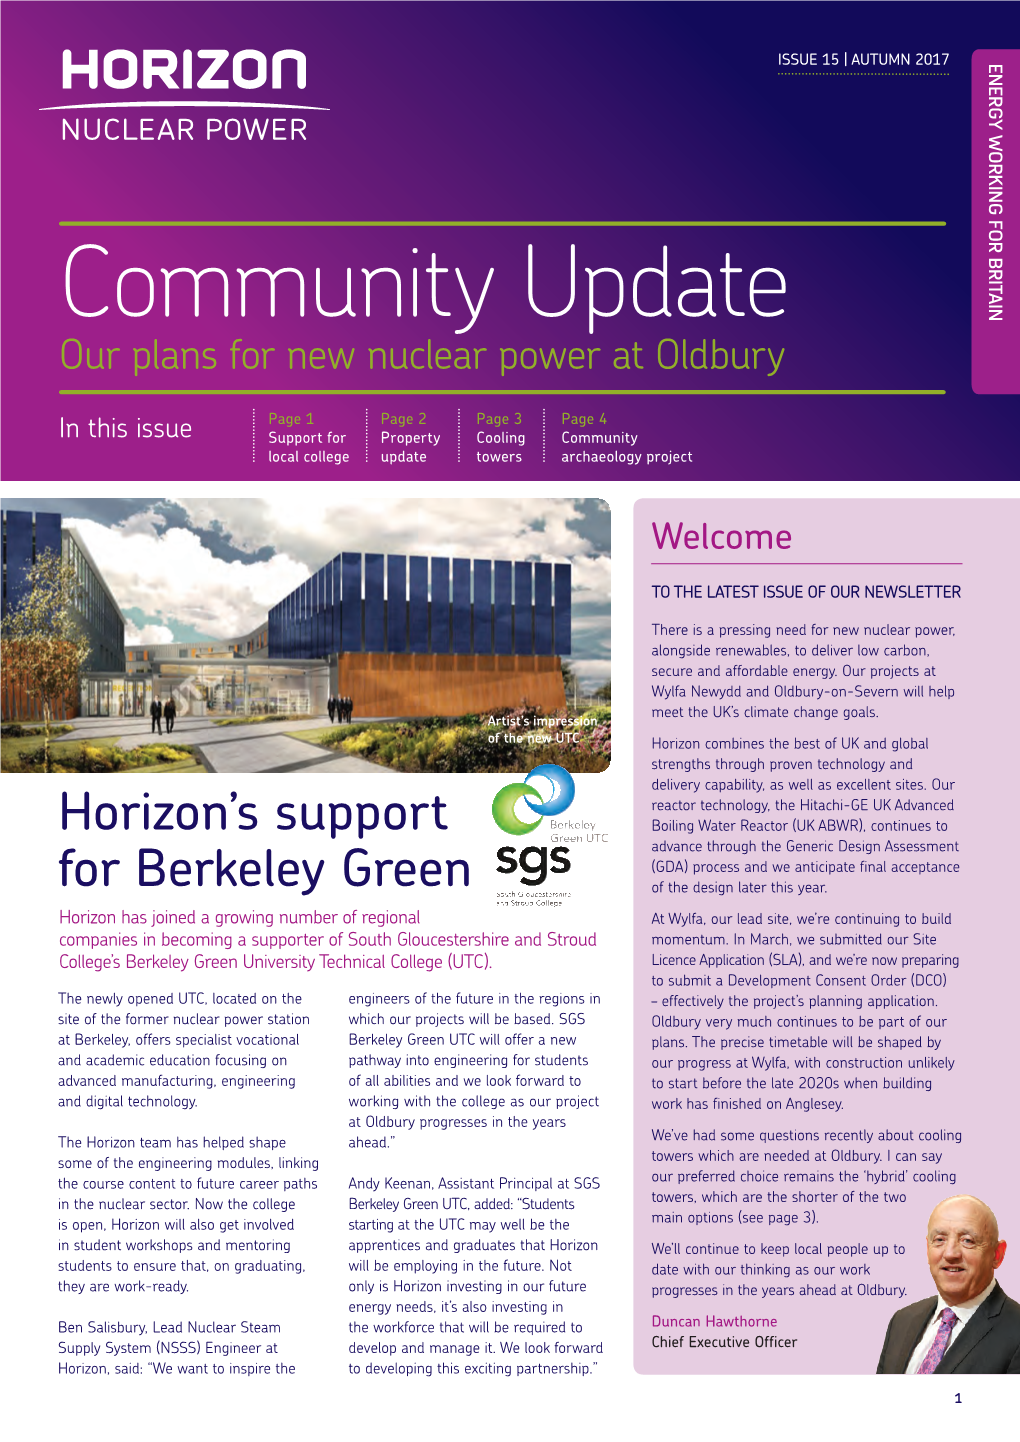 Community Update Our Plans for New Nuclear Power at Oldbury